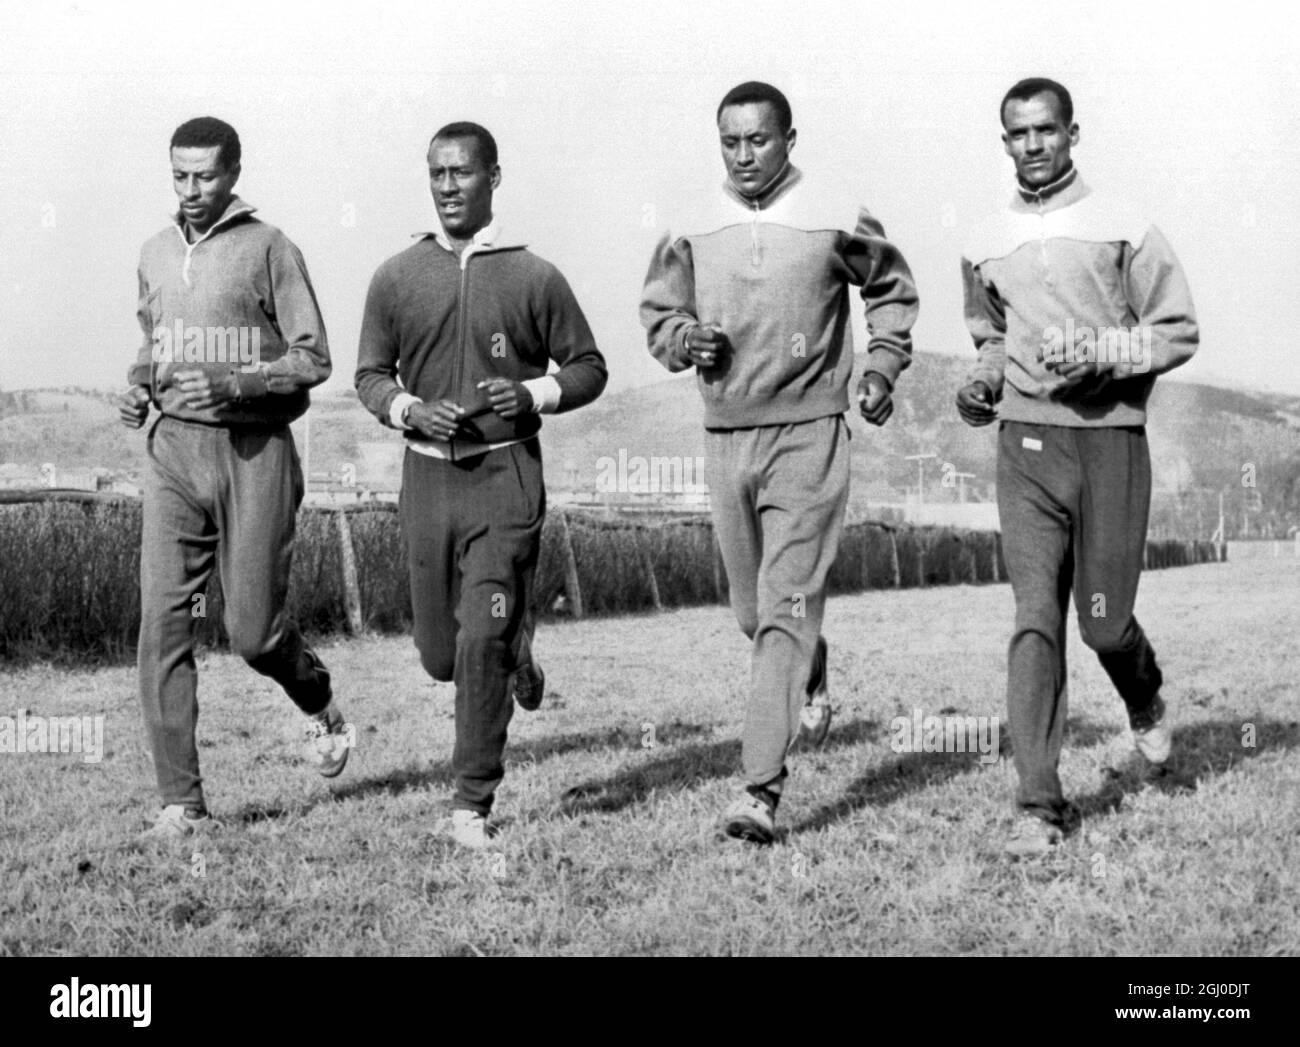 San Sebastian, Spain. Ethiopian long distance runners in traning at this northern Spanish coastal resort for the international cross country contest. Left to right are: Mamo Wolde, Tsegaye Mariam, (trainer) Yitayew, and Abebe Bikila the Olympic marathon champion. 20th January 1964 Stock Photo